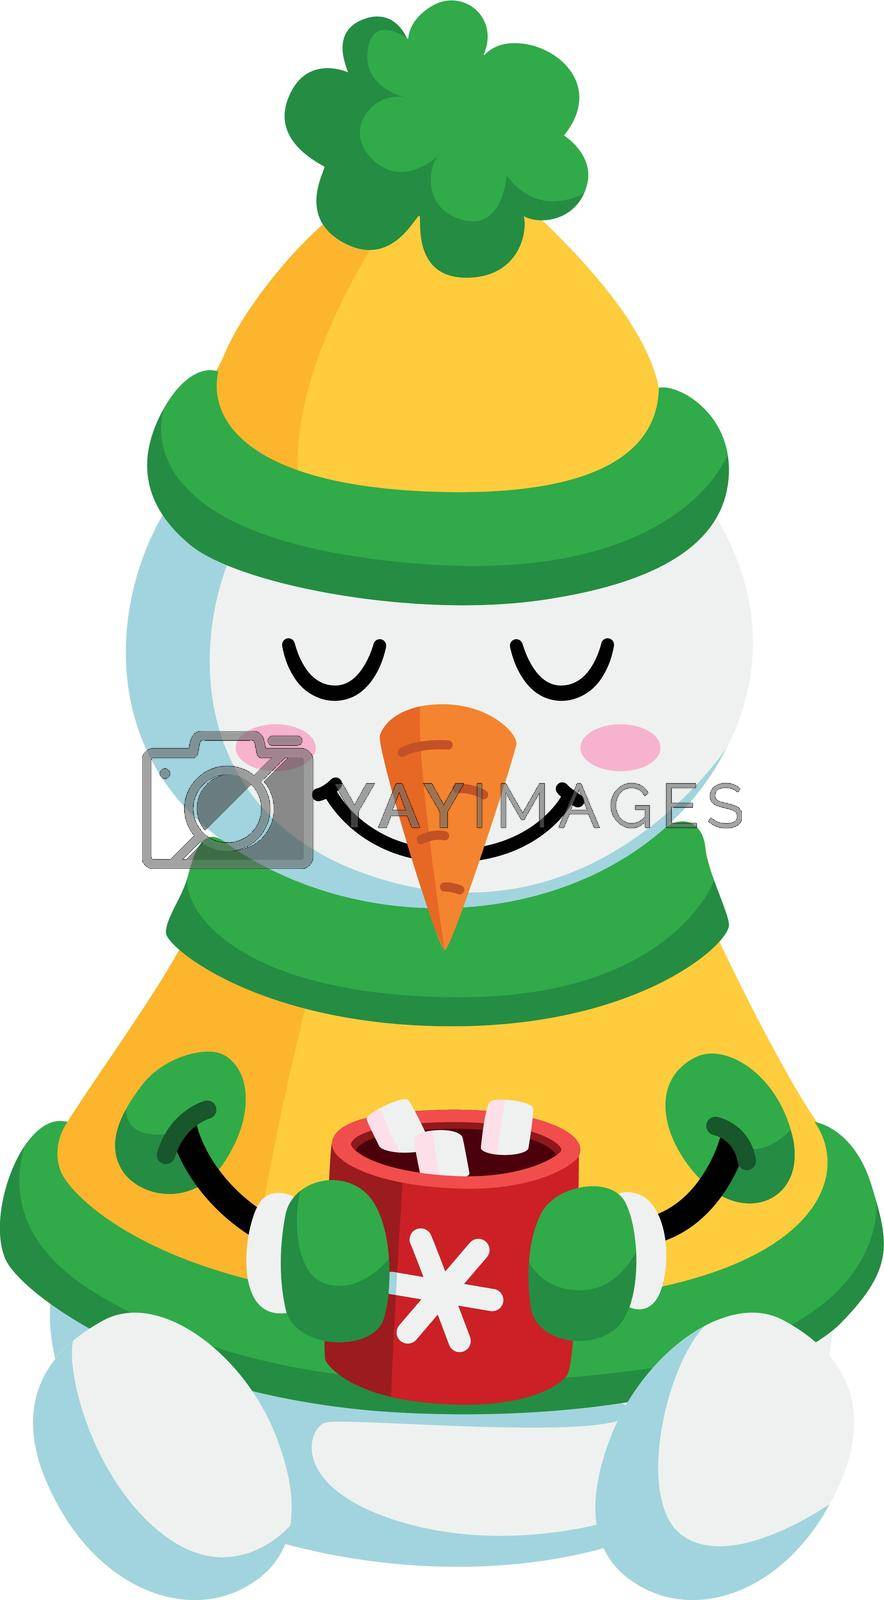 Royalty free image of Cocoa cup marshmallow in cute snowman hands. Cartoon cozy character by LadadikArt